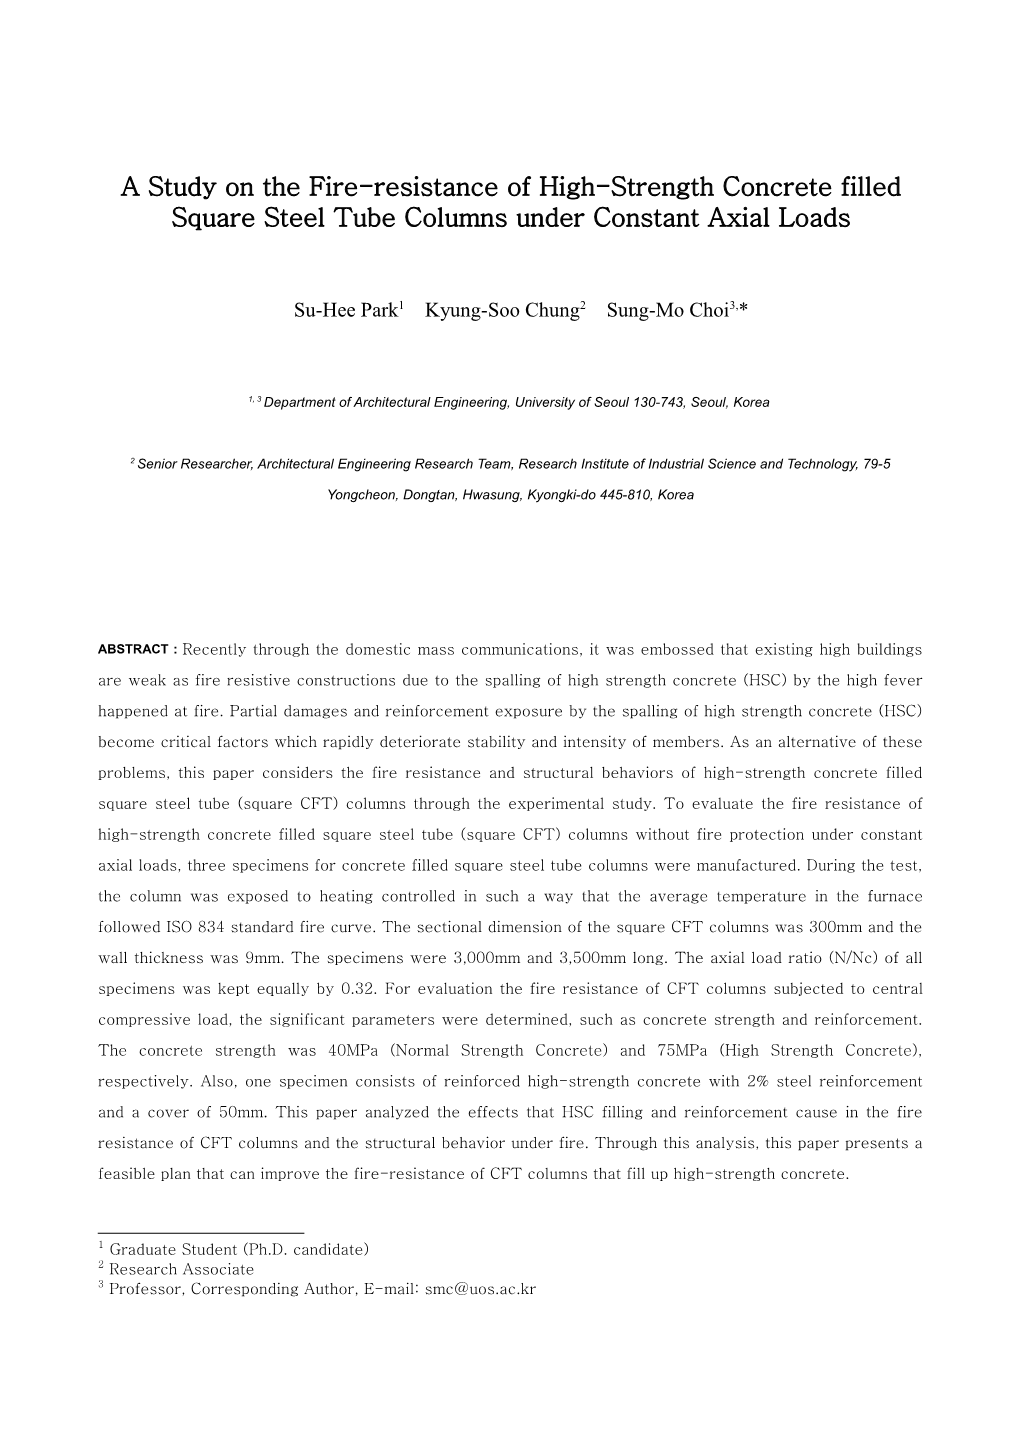 Structural Characteristics of CFT Square Column-To-Beam Partially Restrained Composite